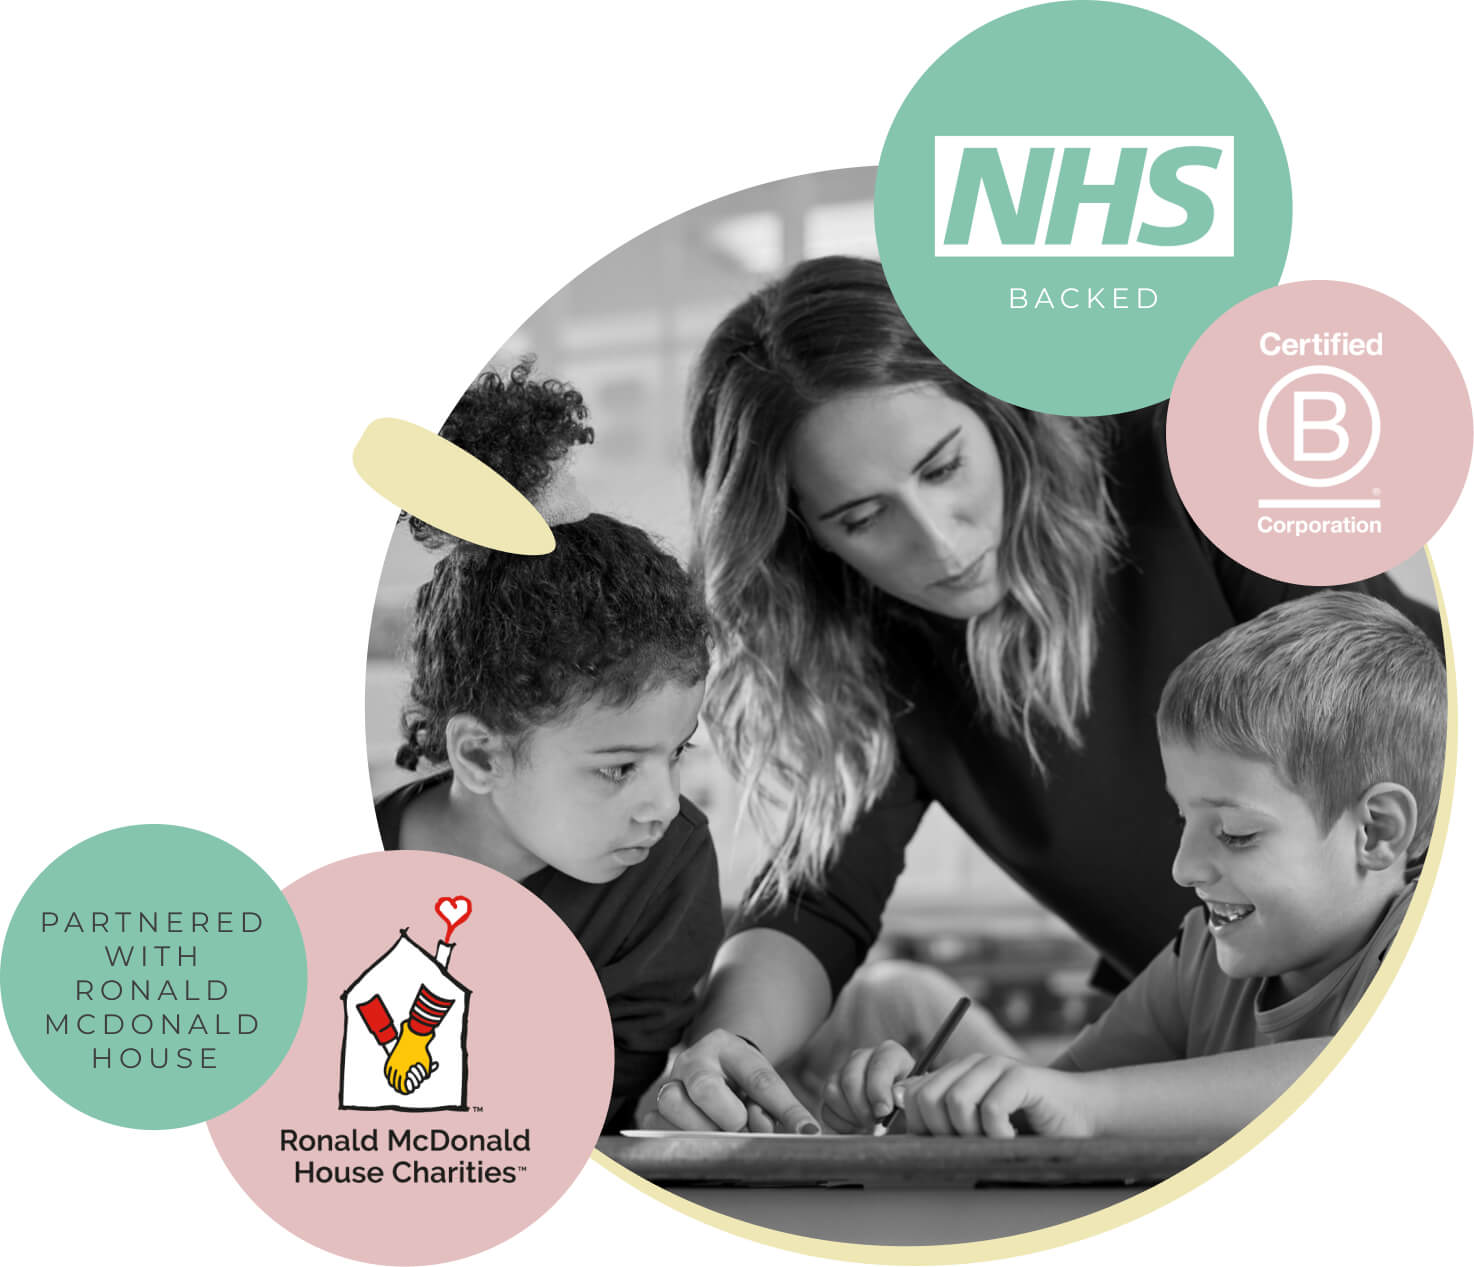 myHappymind mental health and wellbeing for Schools website header image. Images of the NHS Backed and B Corporation logos. As well as the Ronald McDonald House Charity logo.